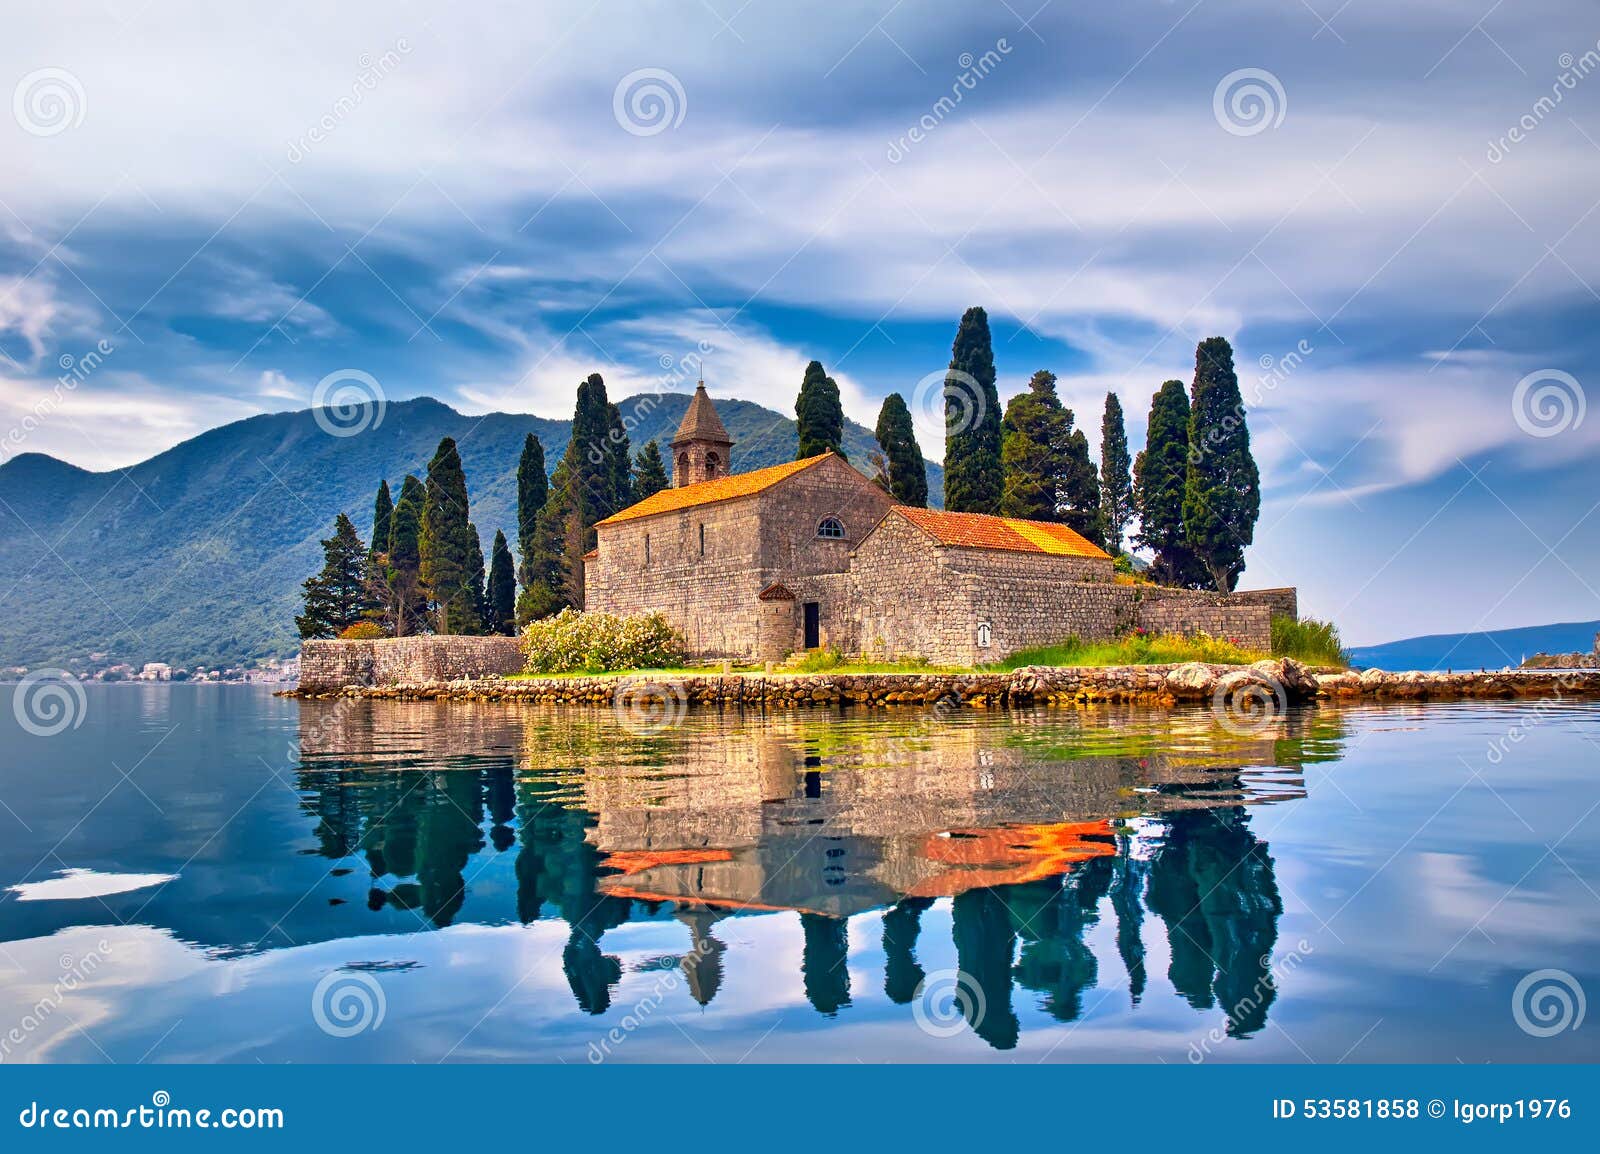 island on the lake in montenegro